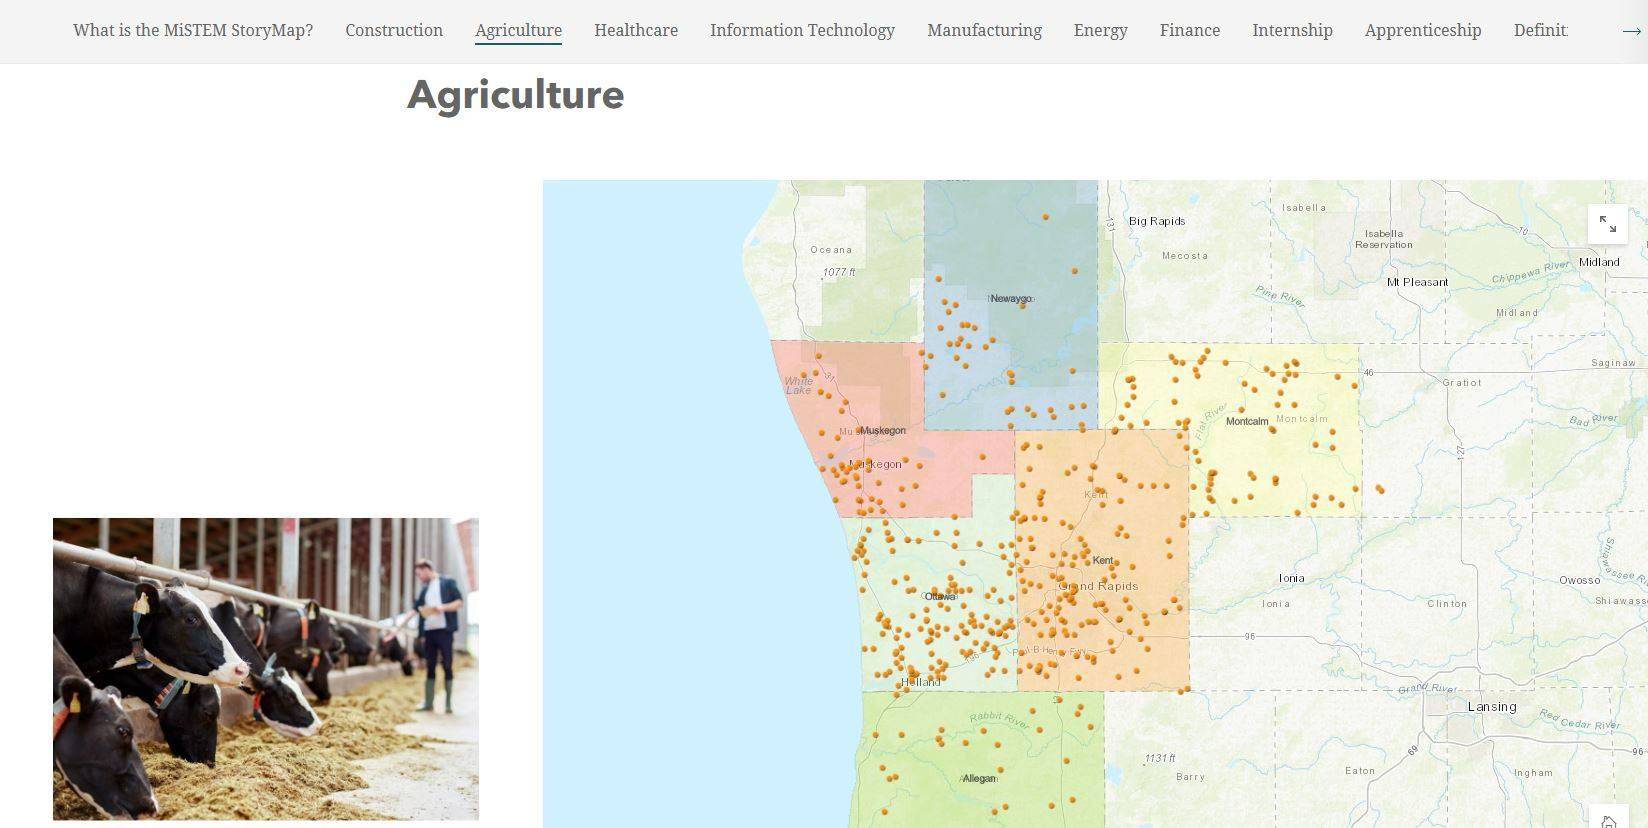 image of the agricultural map in West Michigan with an image of a farmer and cows